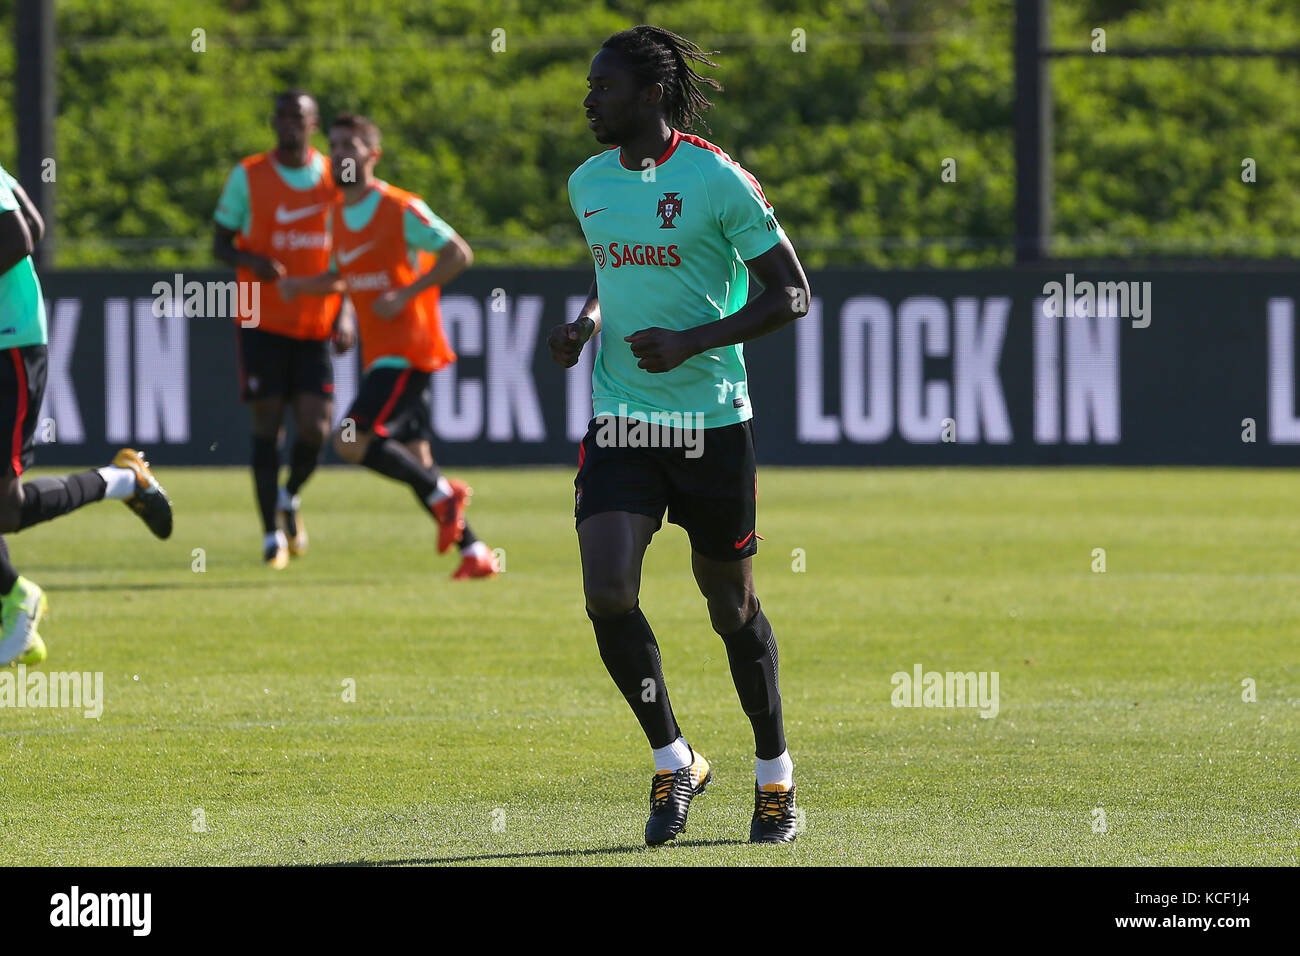 Lisbon, Portugal. 4th Oct, 2017. Portugal forward Eder in action during National Team Training session before the match between Portugal and Andorra at City Football in Oeiras, Lisbon on October 4, 2017. Credit: Bruno Barros/Alamy Live News Stock Photo